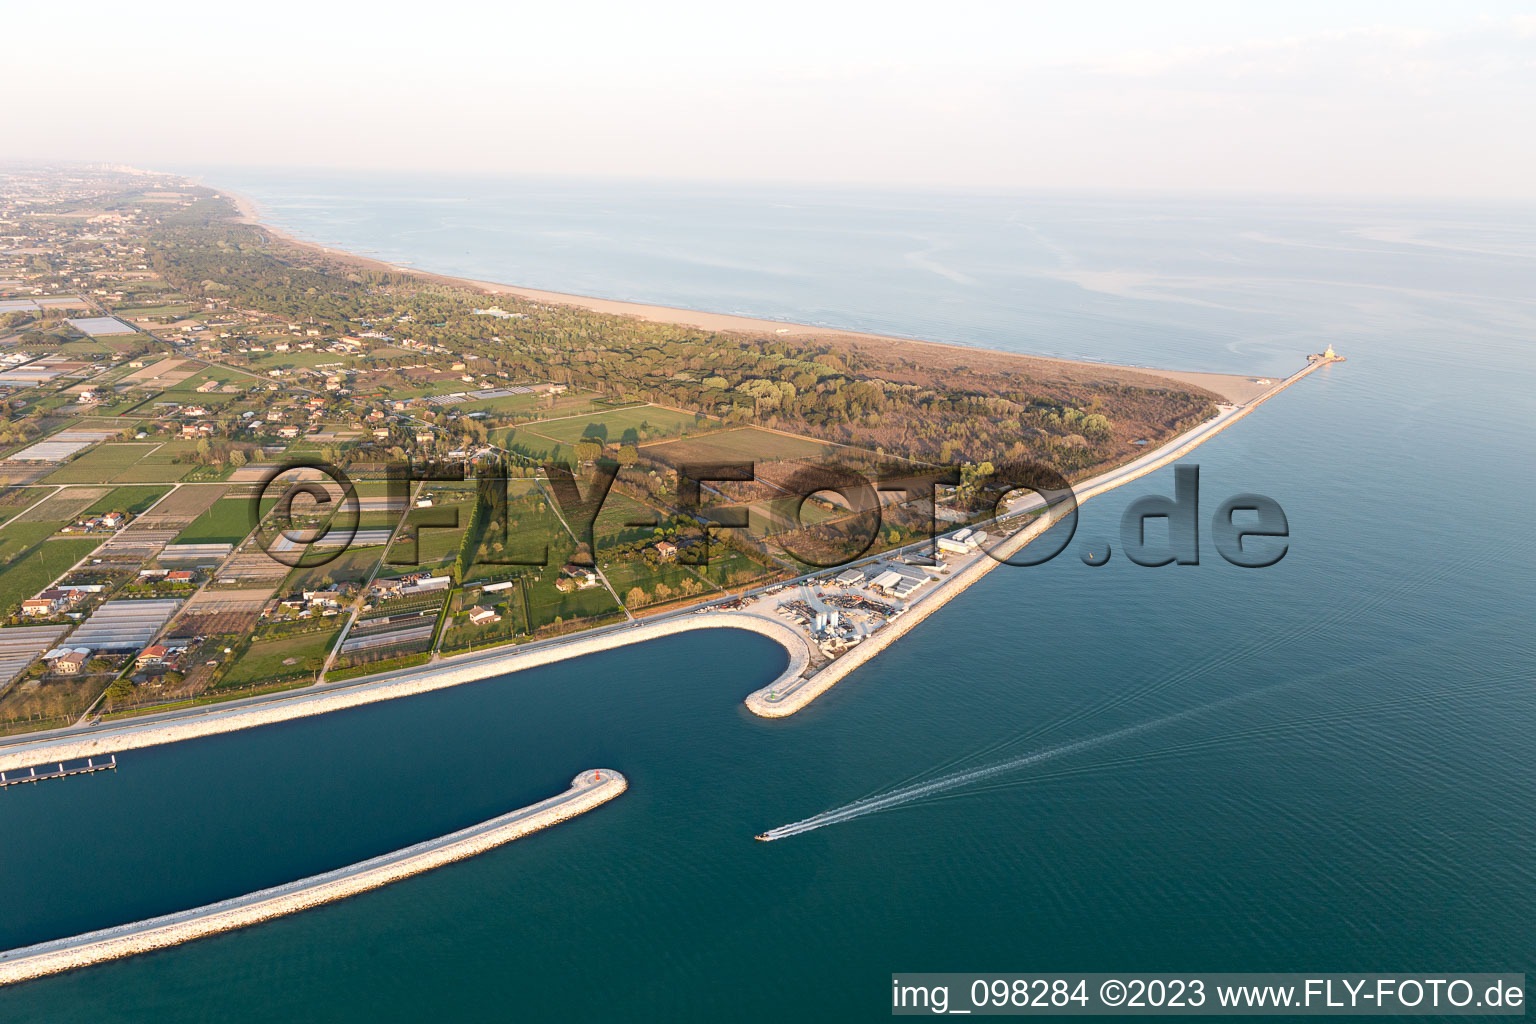 Punta Sabbioni in the state Veneto, Italy from a drone